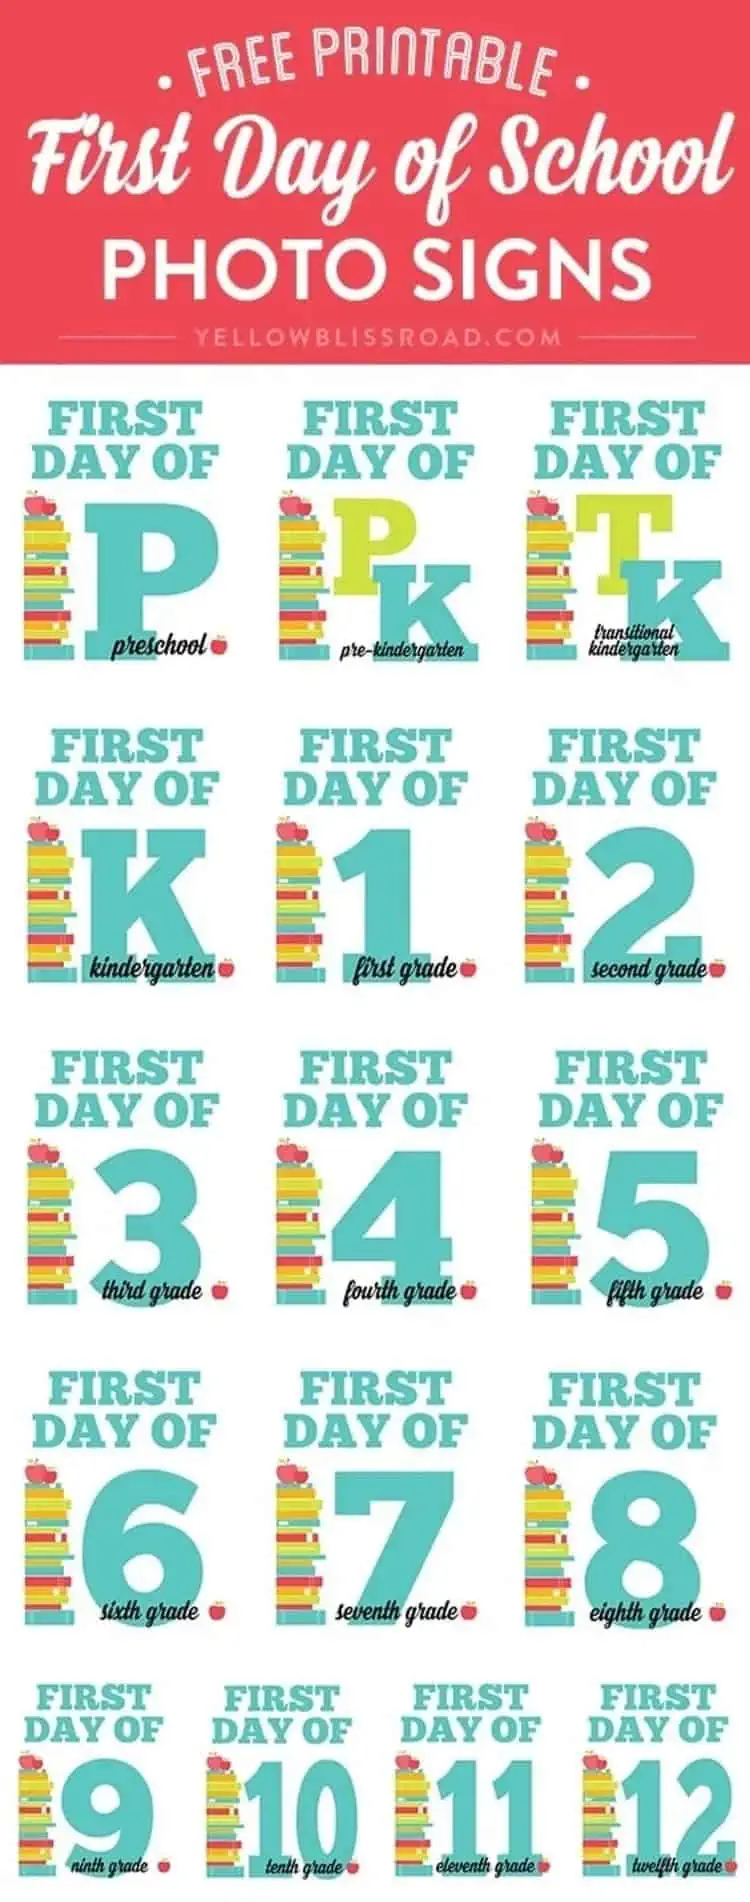 Free printable first day of school photo signs